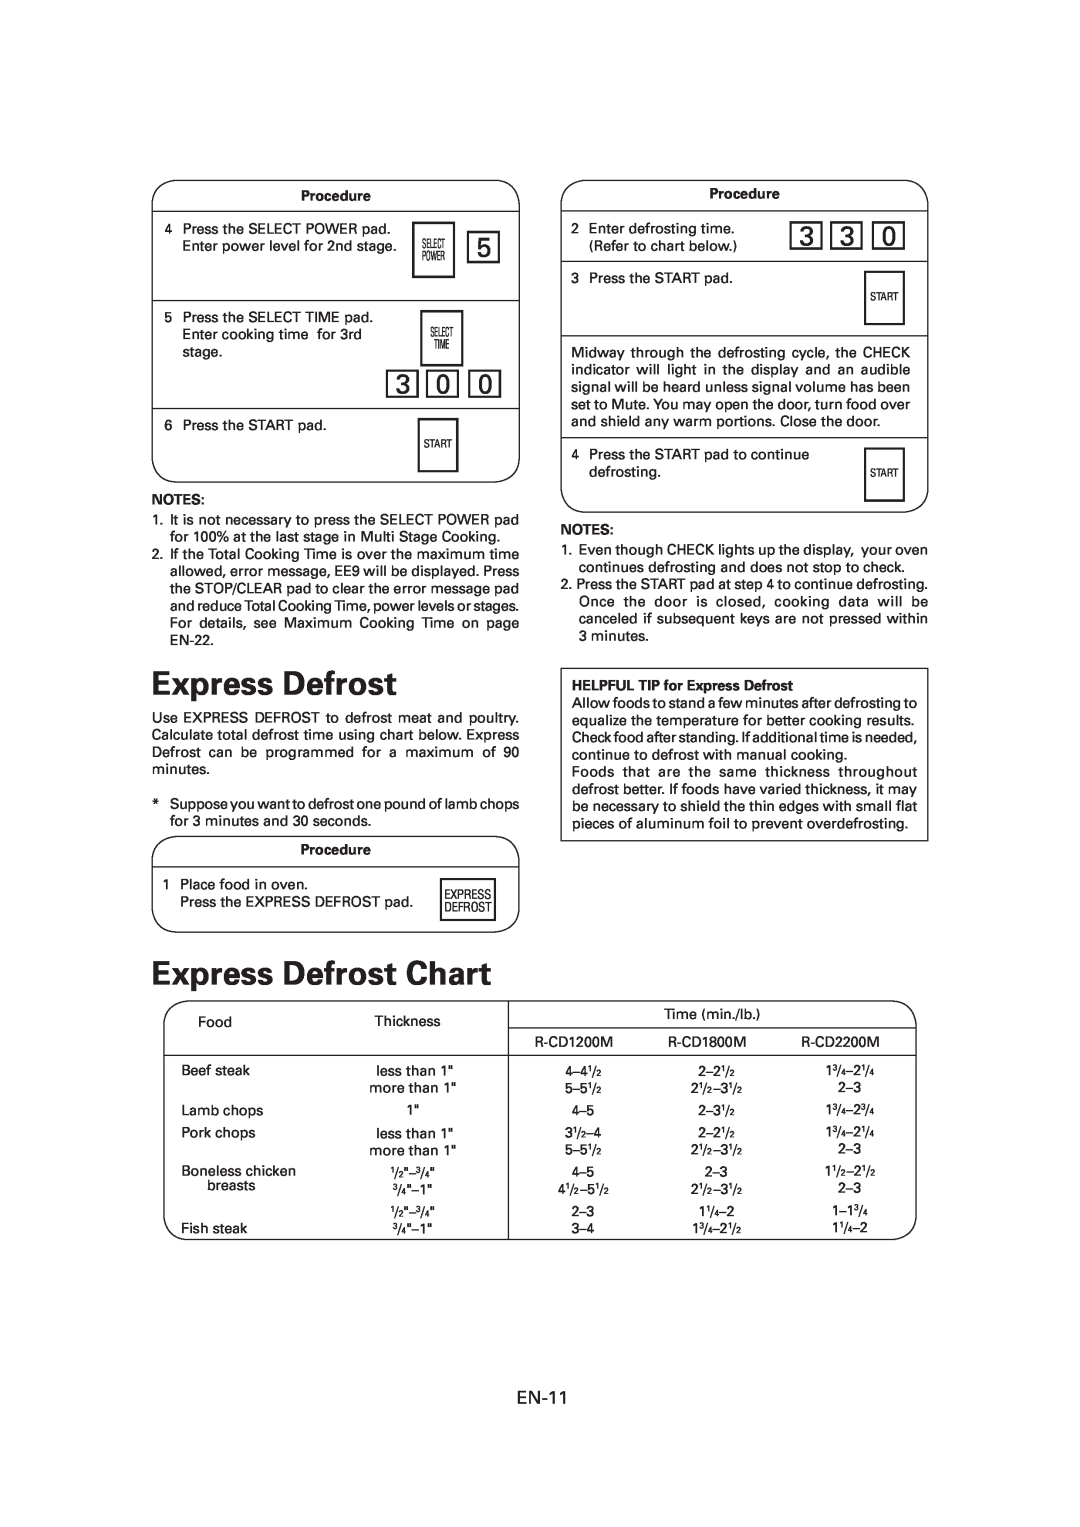 Sharp R-CD1200M, CD1800M, CD2200M Express Defrost Chart, Procedure, Notes, HELPFUL TIP for Express Defrost 